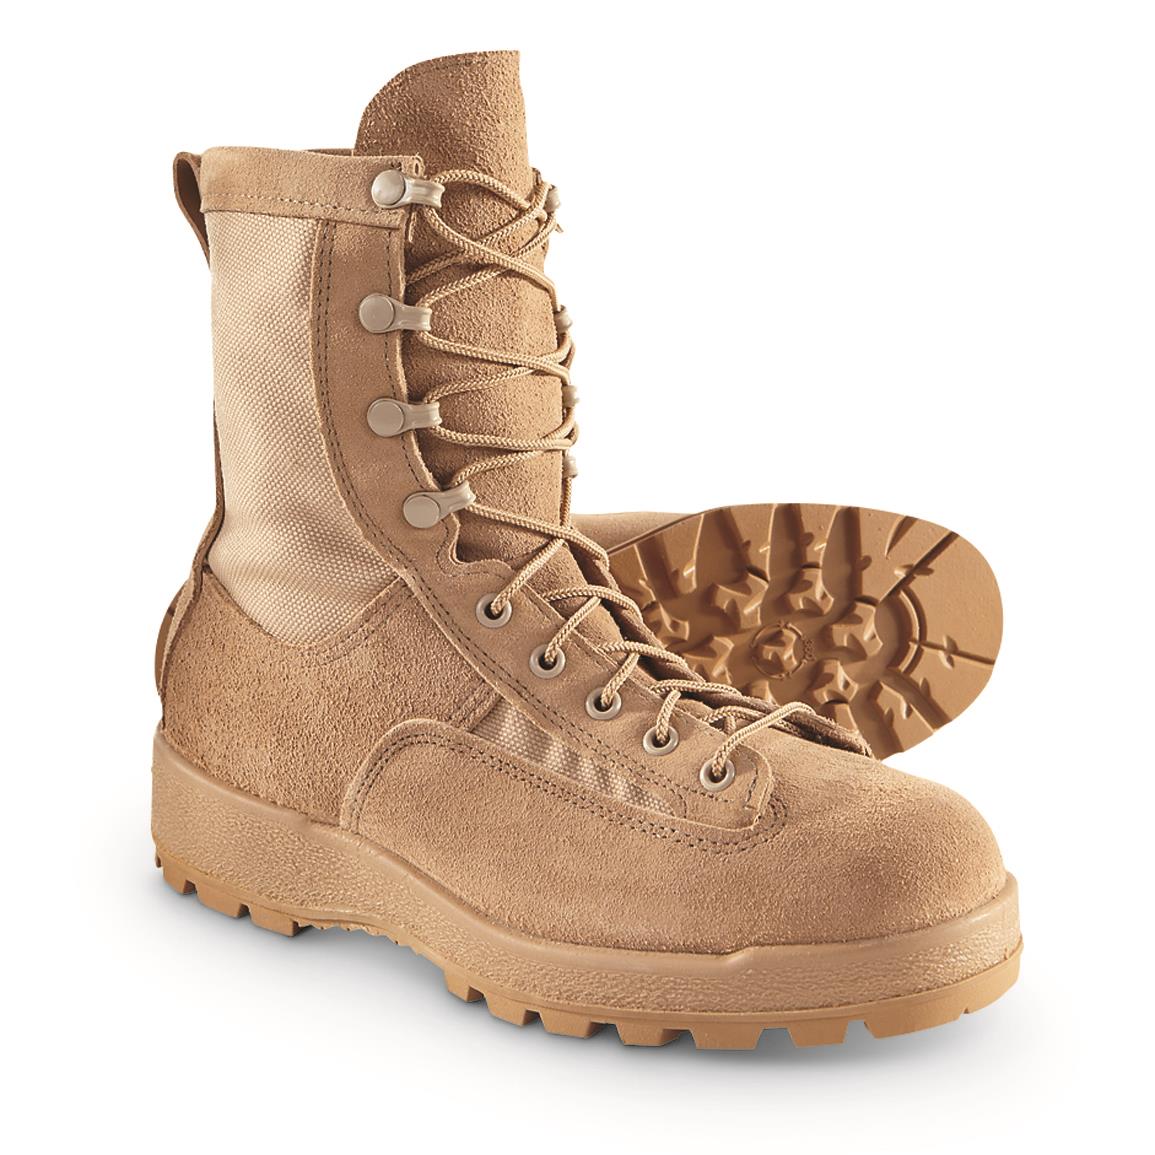 Buy > army goretex boots > in stock